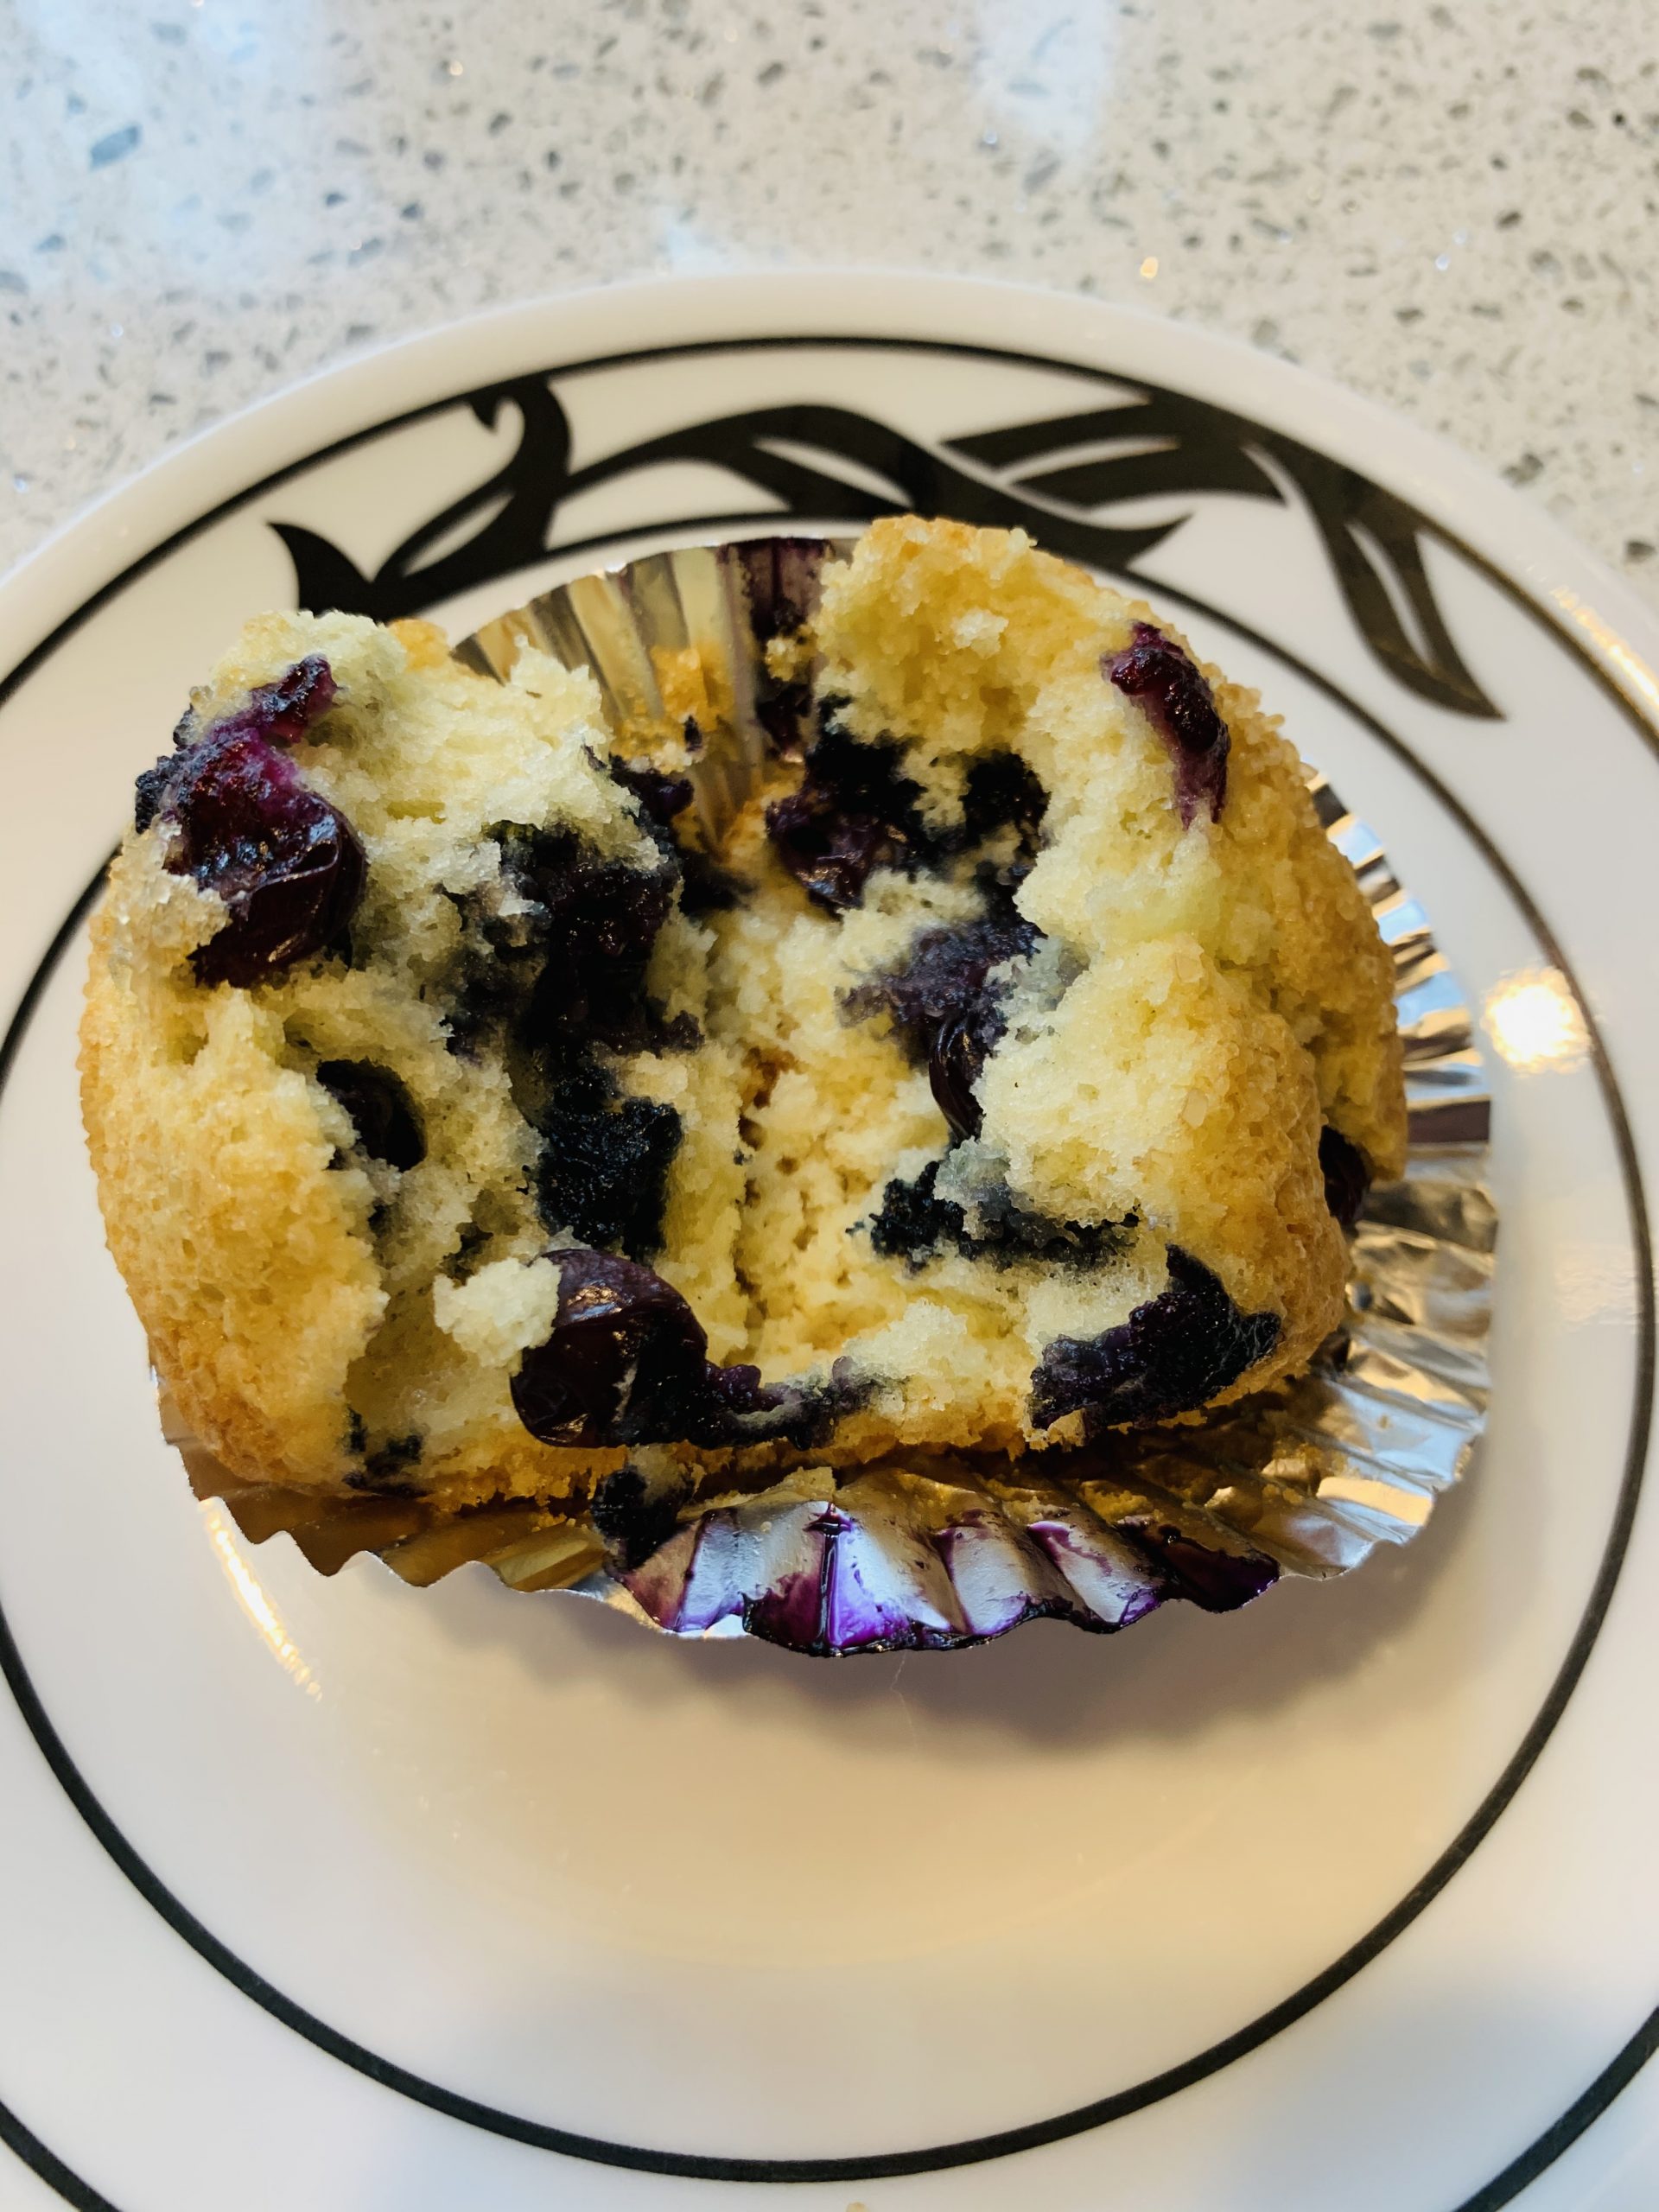 Easy Blueberry Muffins In Under 30 Minutes - Live One Good Life